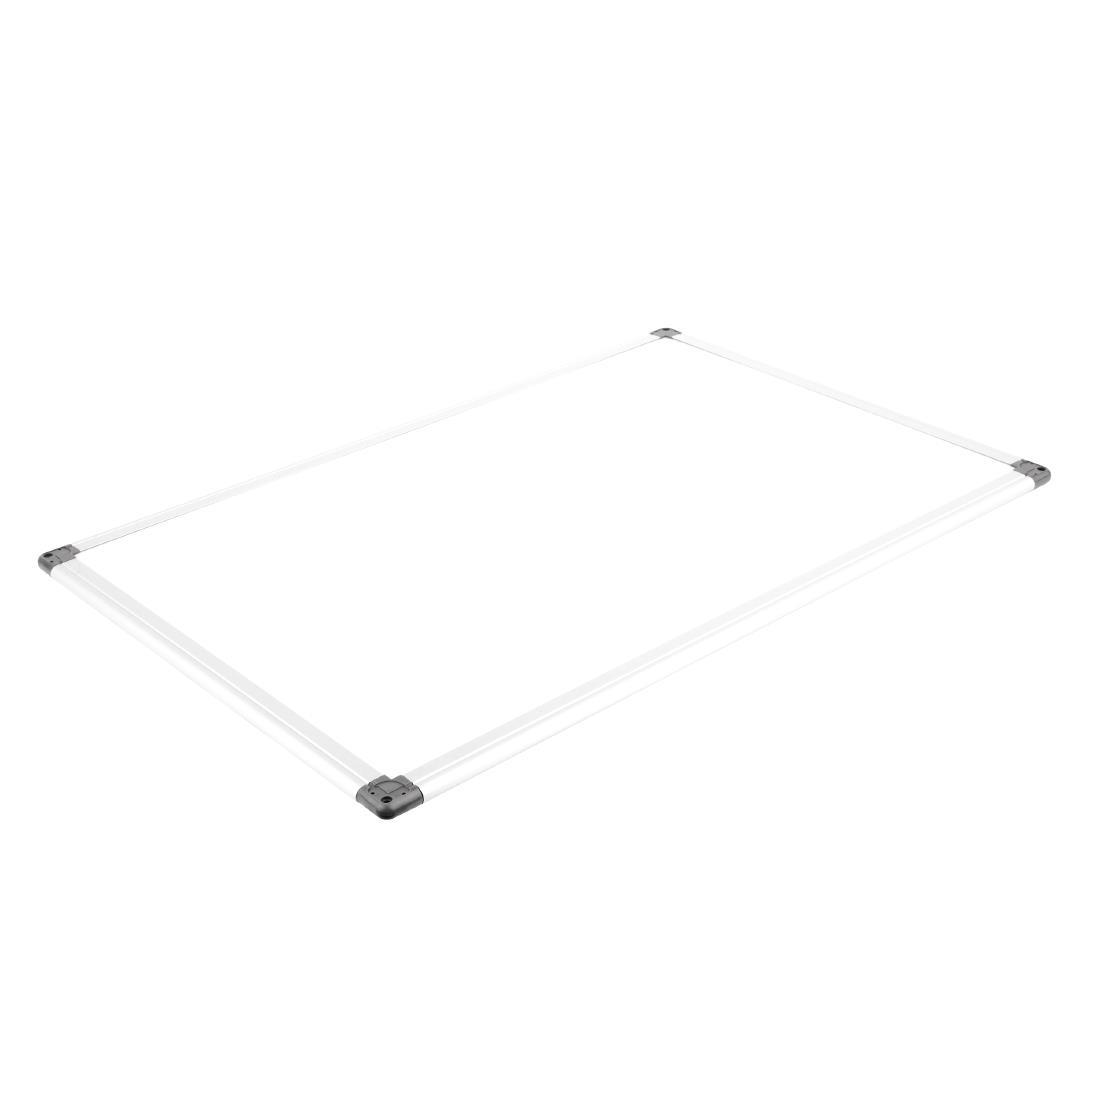 Olympia White Magnetic Board - GG045  - 3